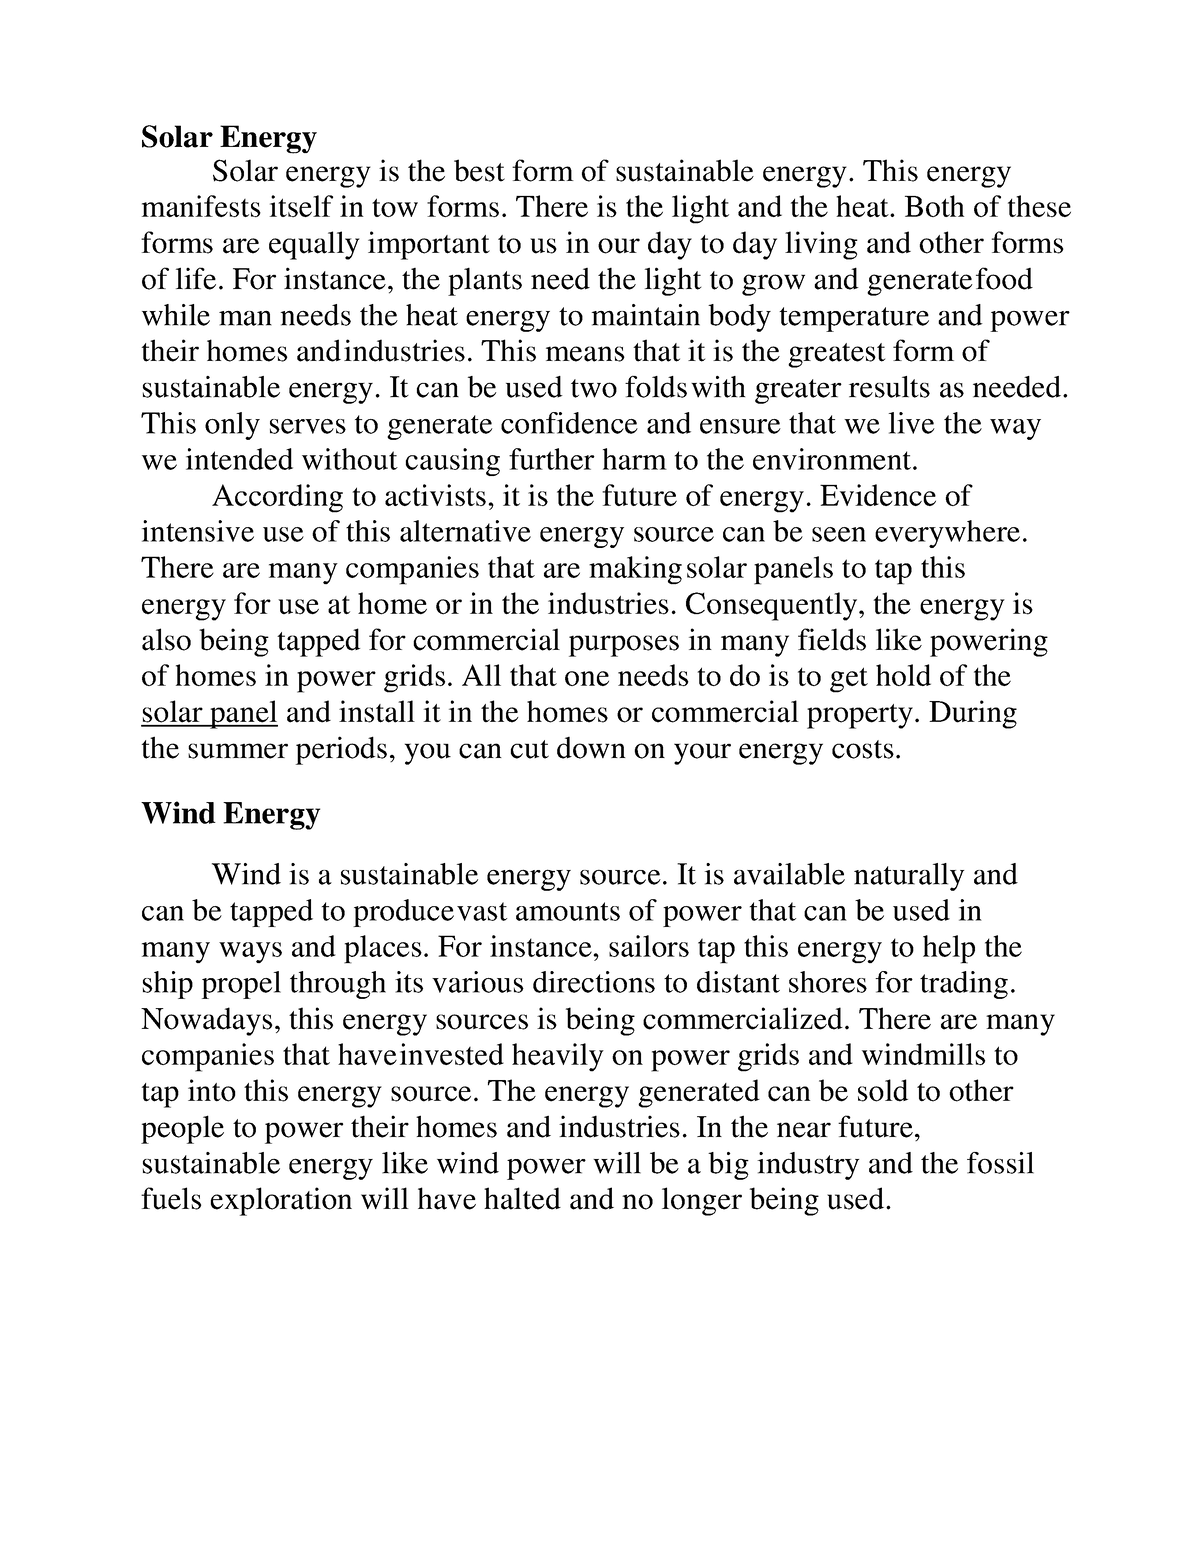 thesis statement about solar energy